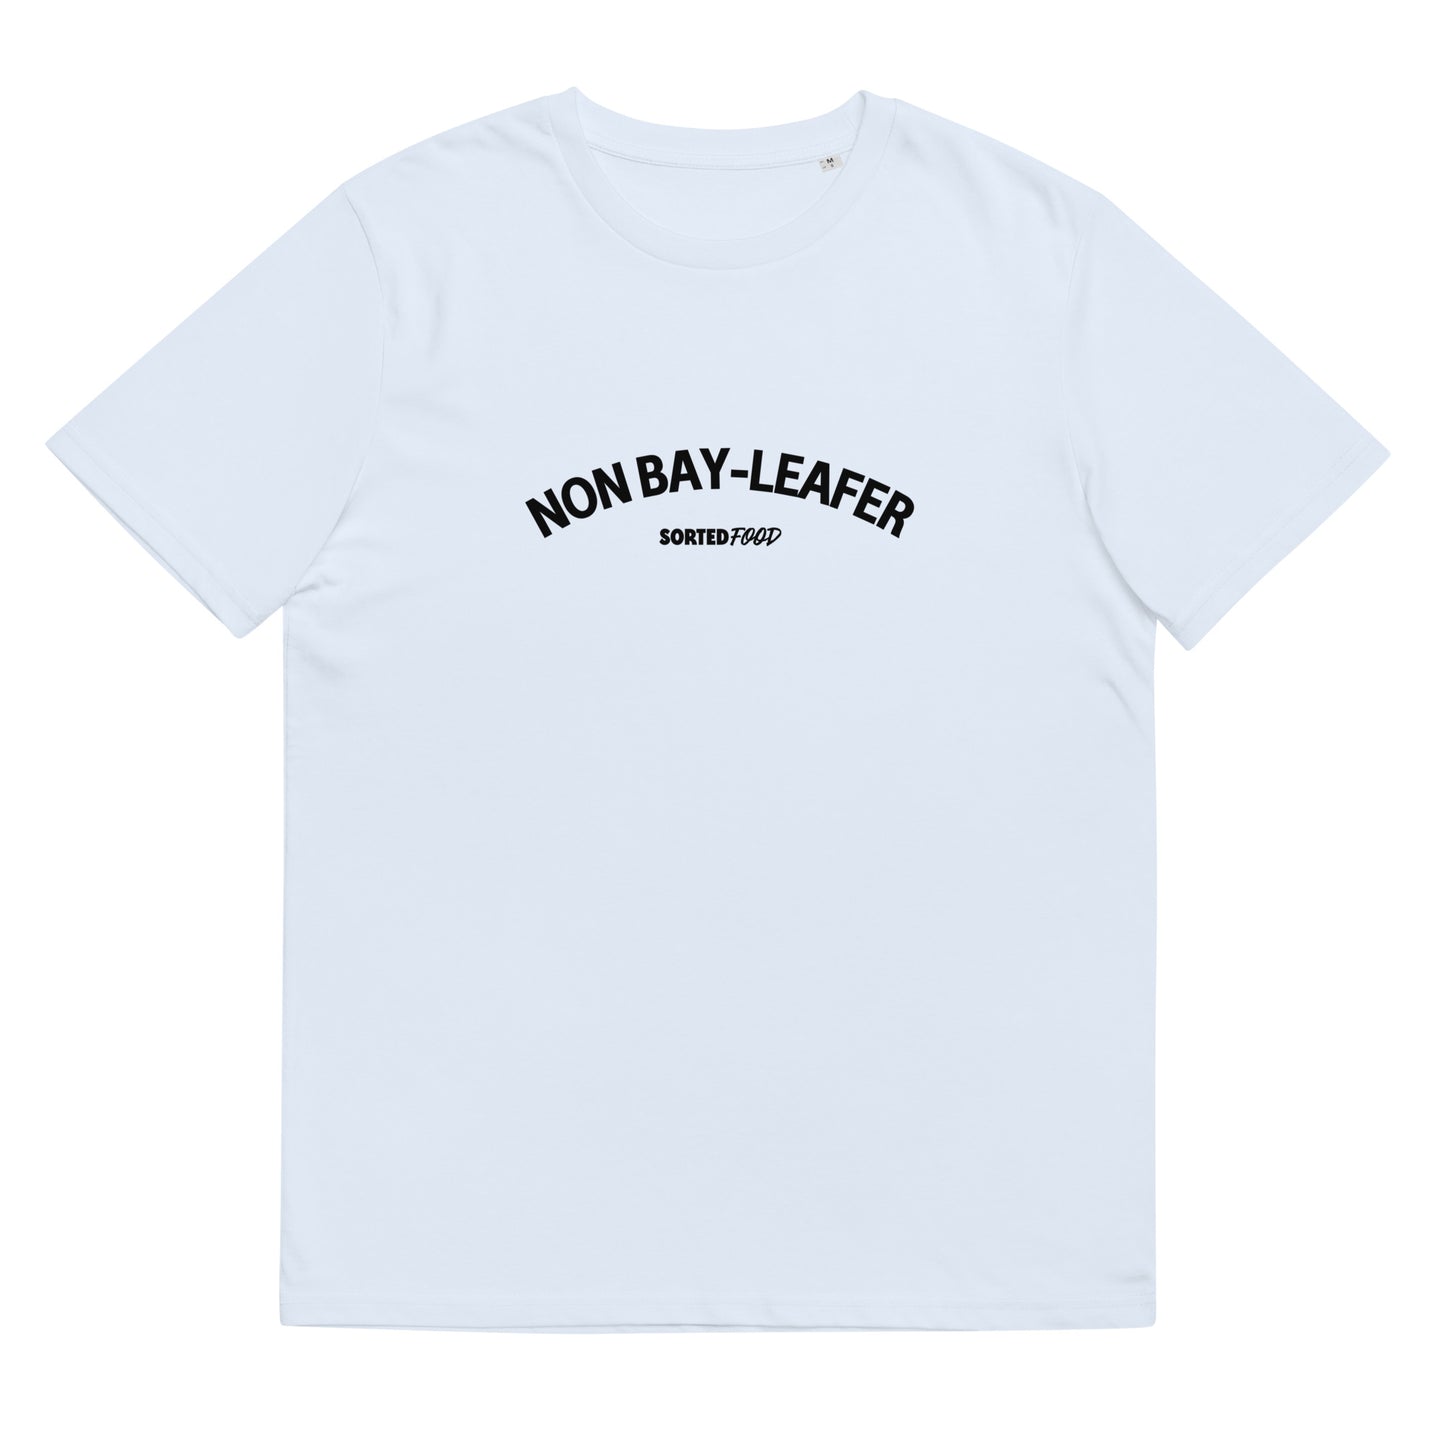 Non Bay-Leafer Tee